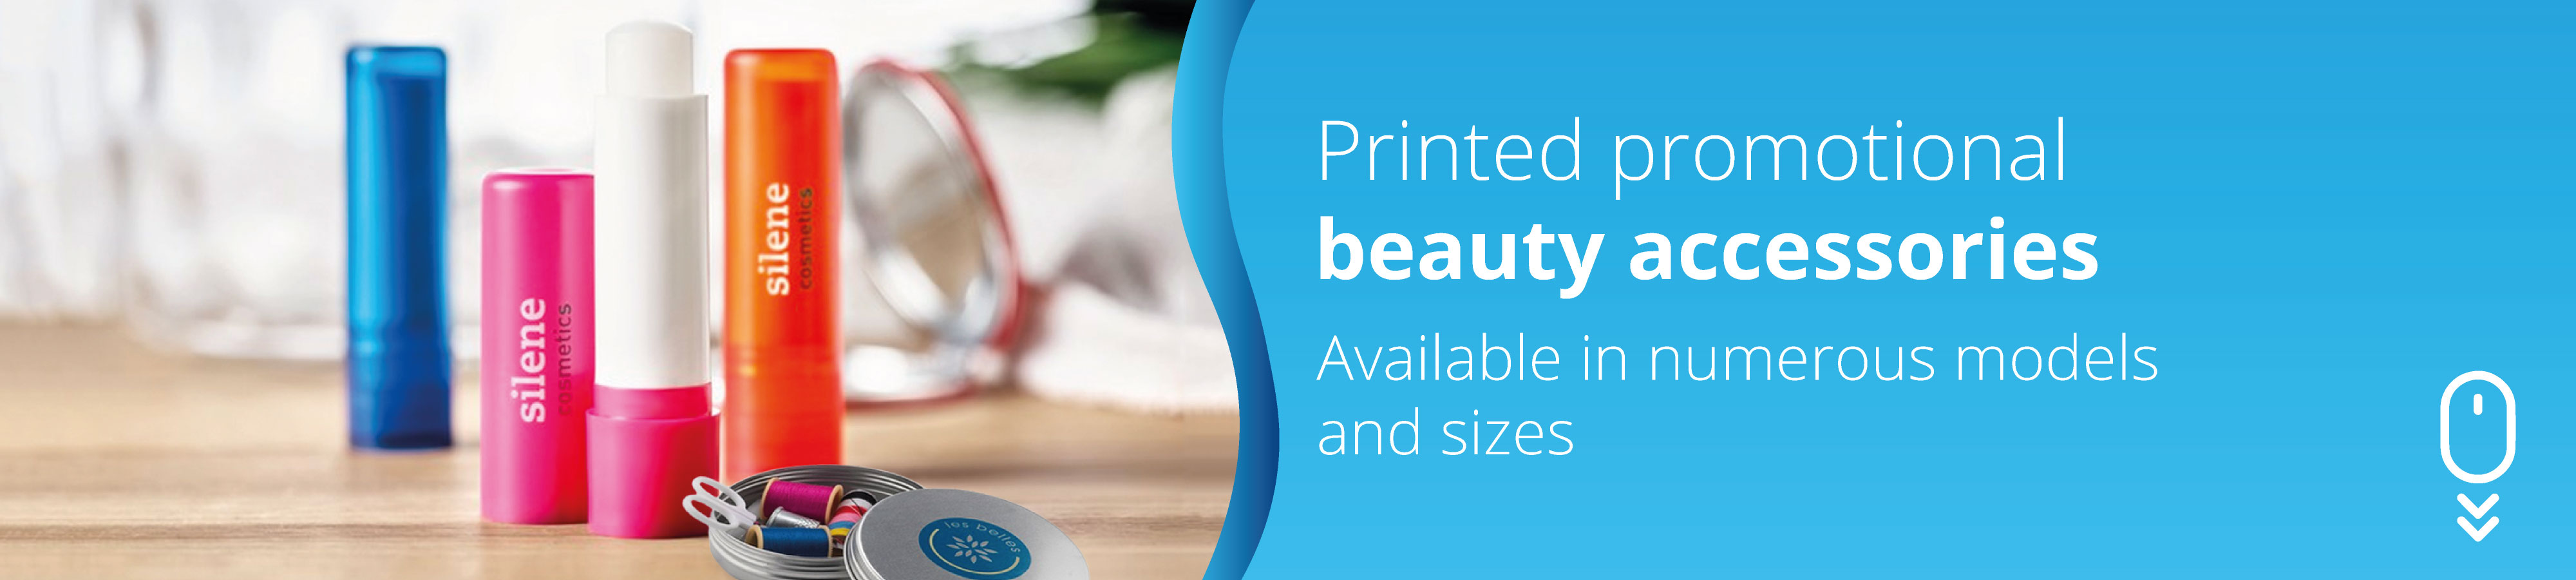 Printed-promotional-beauty-accessories